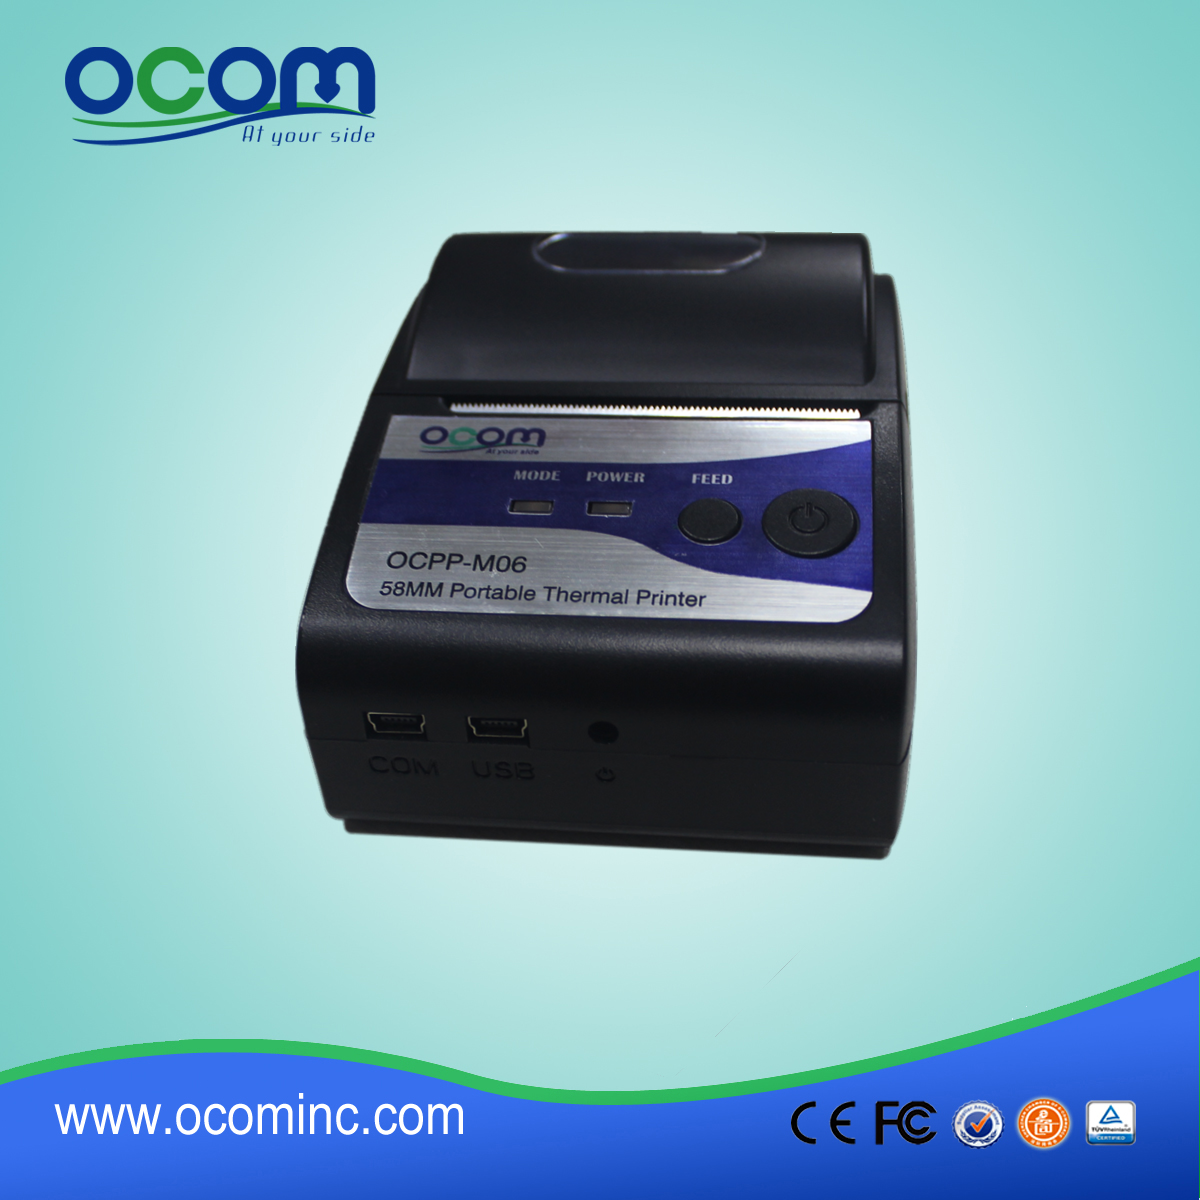 OCPP-M06 58mm portable receipt thermal printer for Iphone